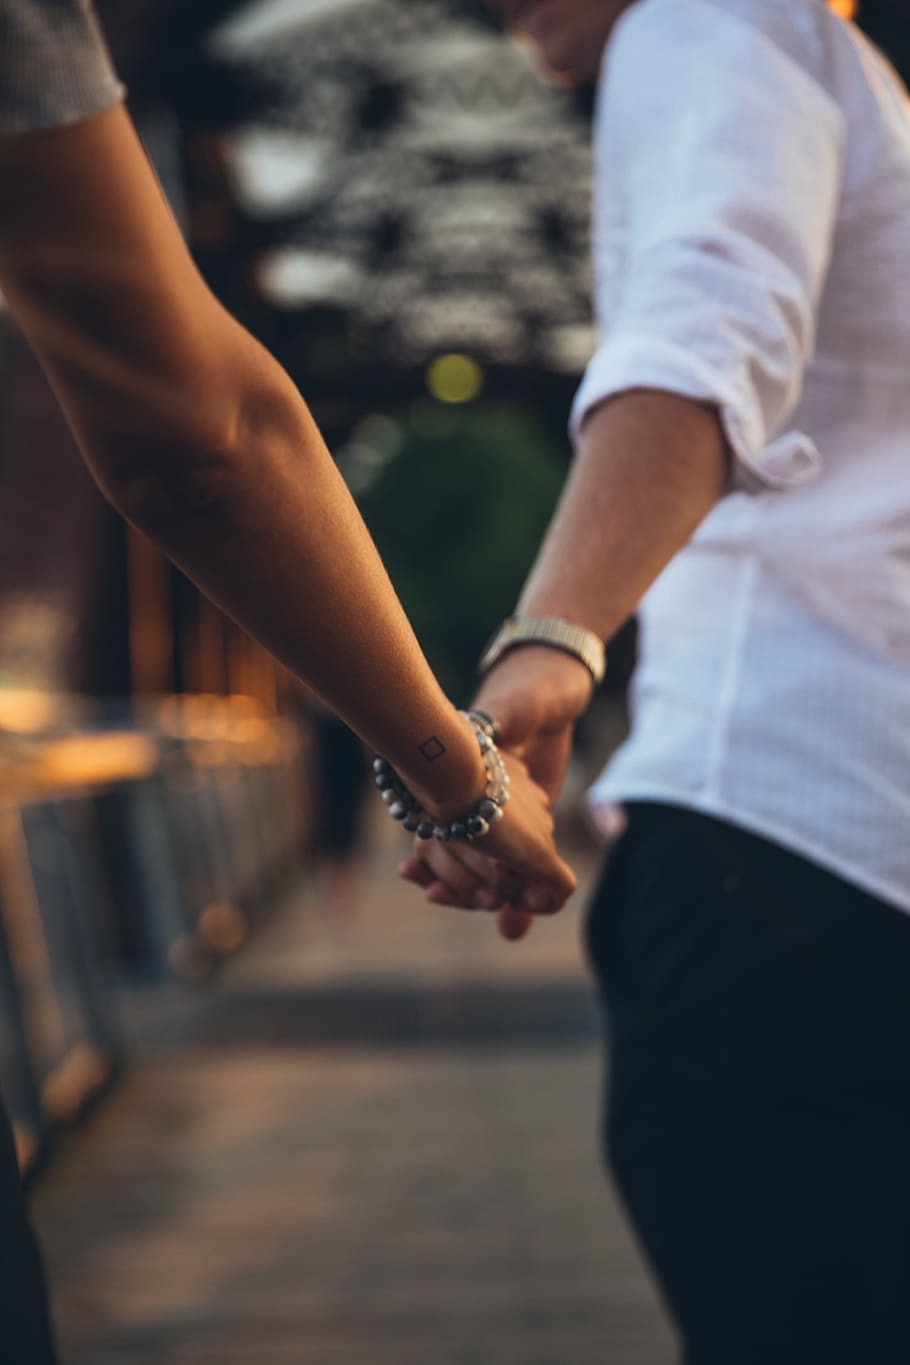 HD wallpaper: Hand Holding In Love Photo, Hands, Couple, Friends,  Valentines Day | Wallpaper Flare